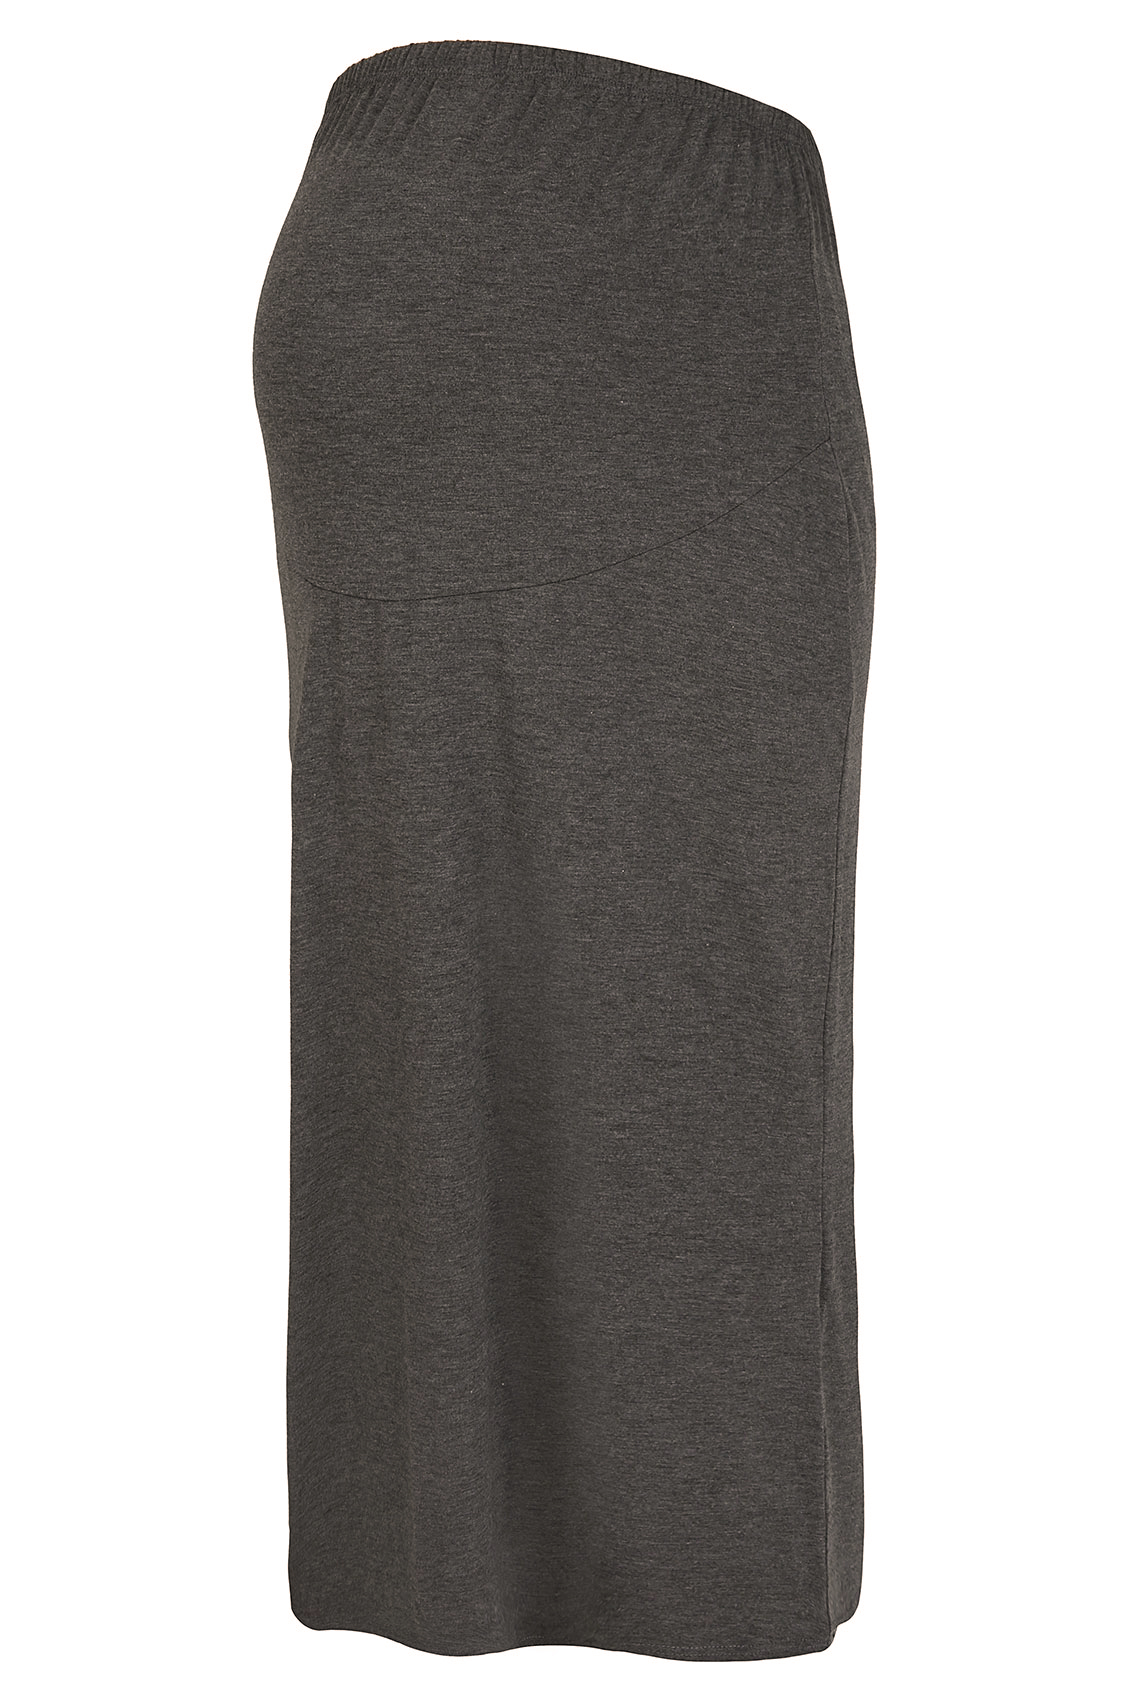 BUMP IT UP MATERNITY Grey Tube Maxi Skirt With Comfort Panel Plus Size 16 to 321133 x 1700